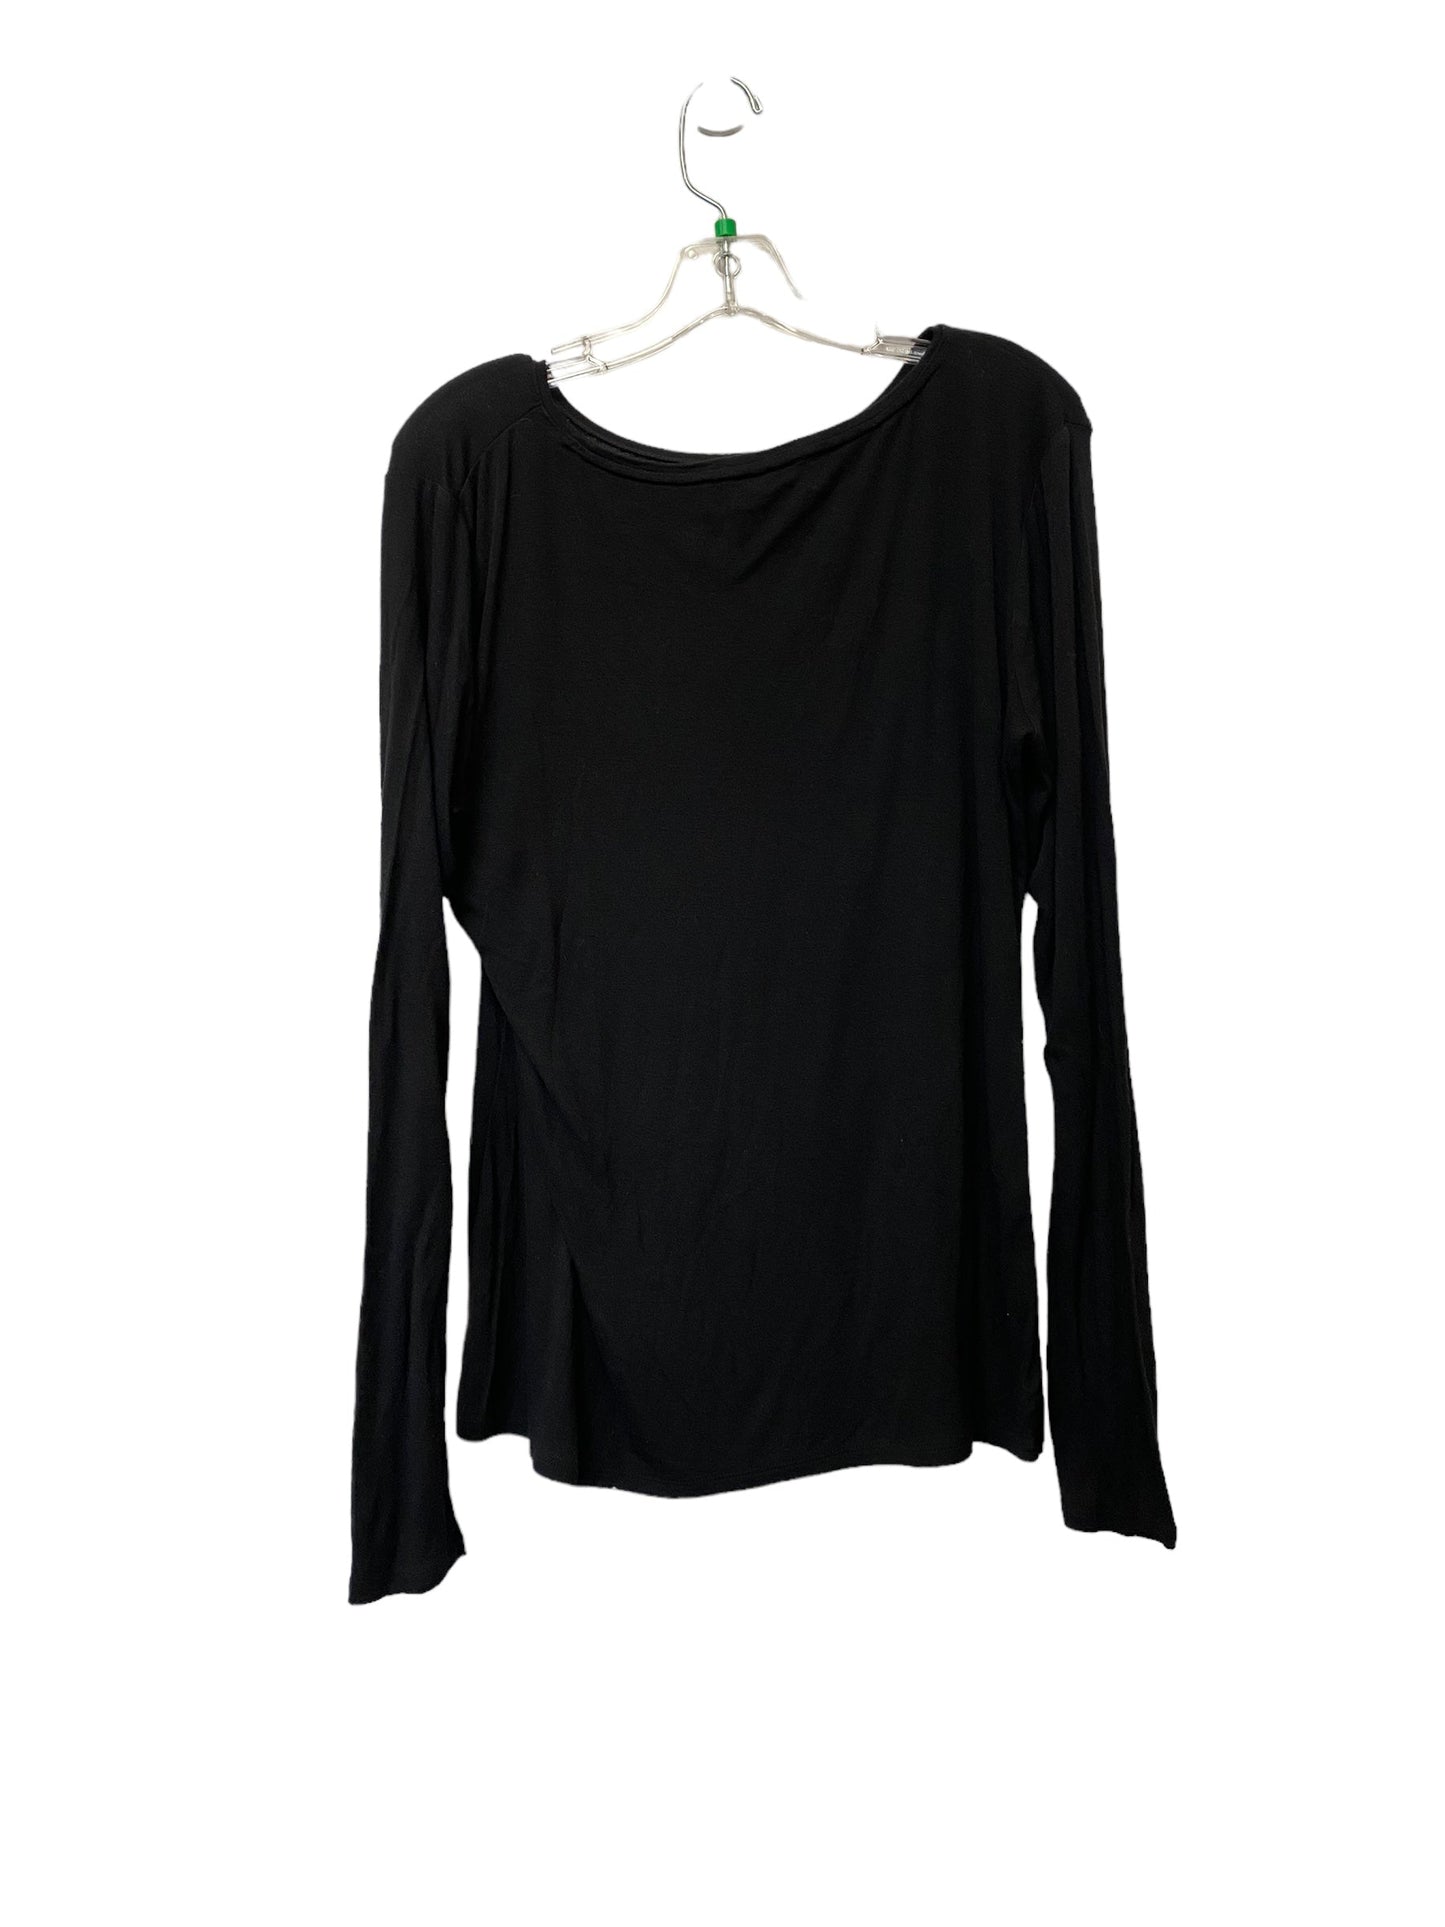 Top Long Sleeve Basic By White House Black Market  Size: L